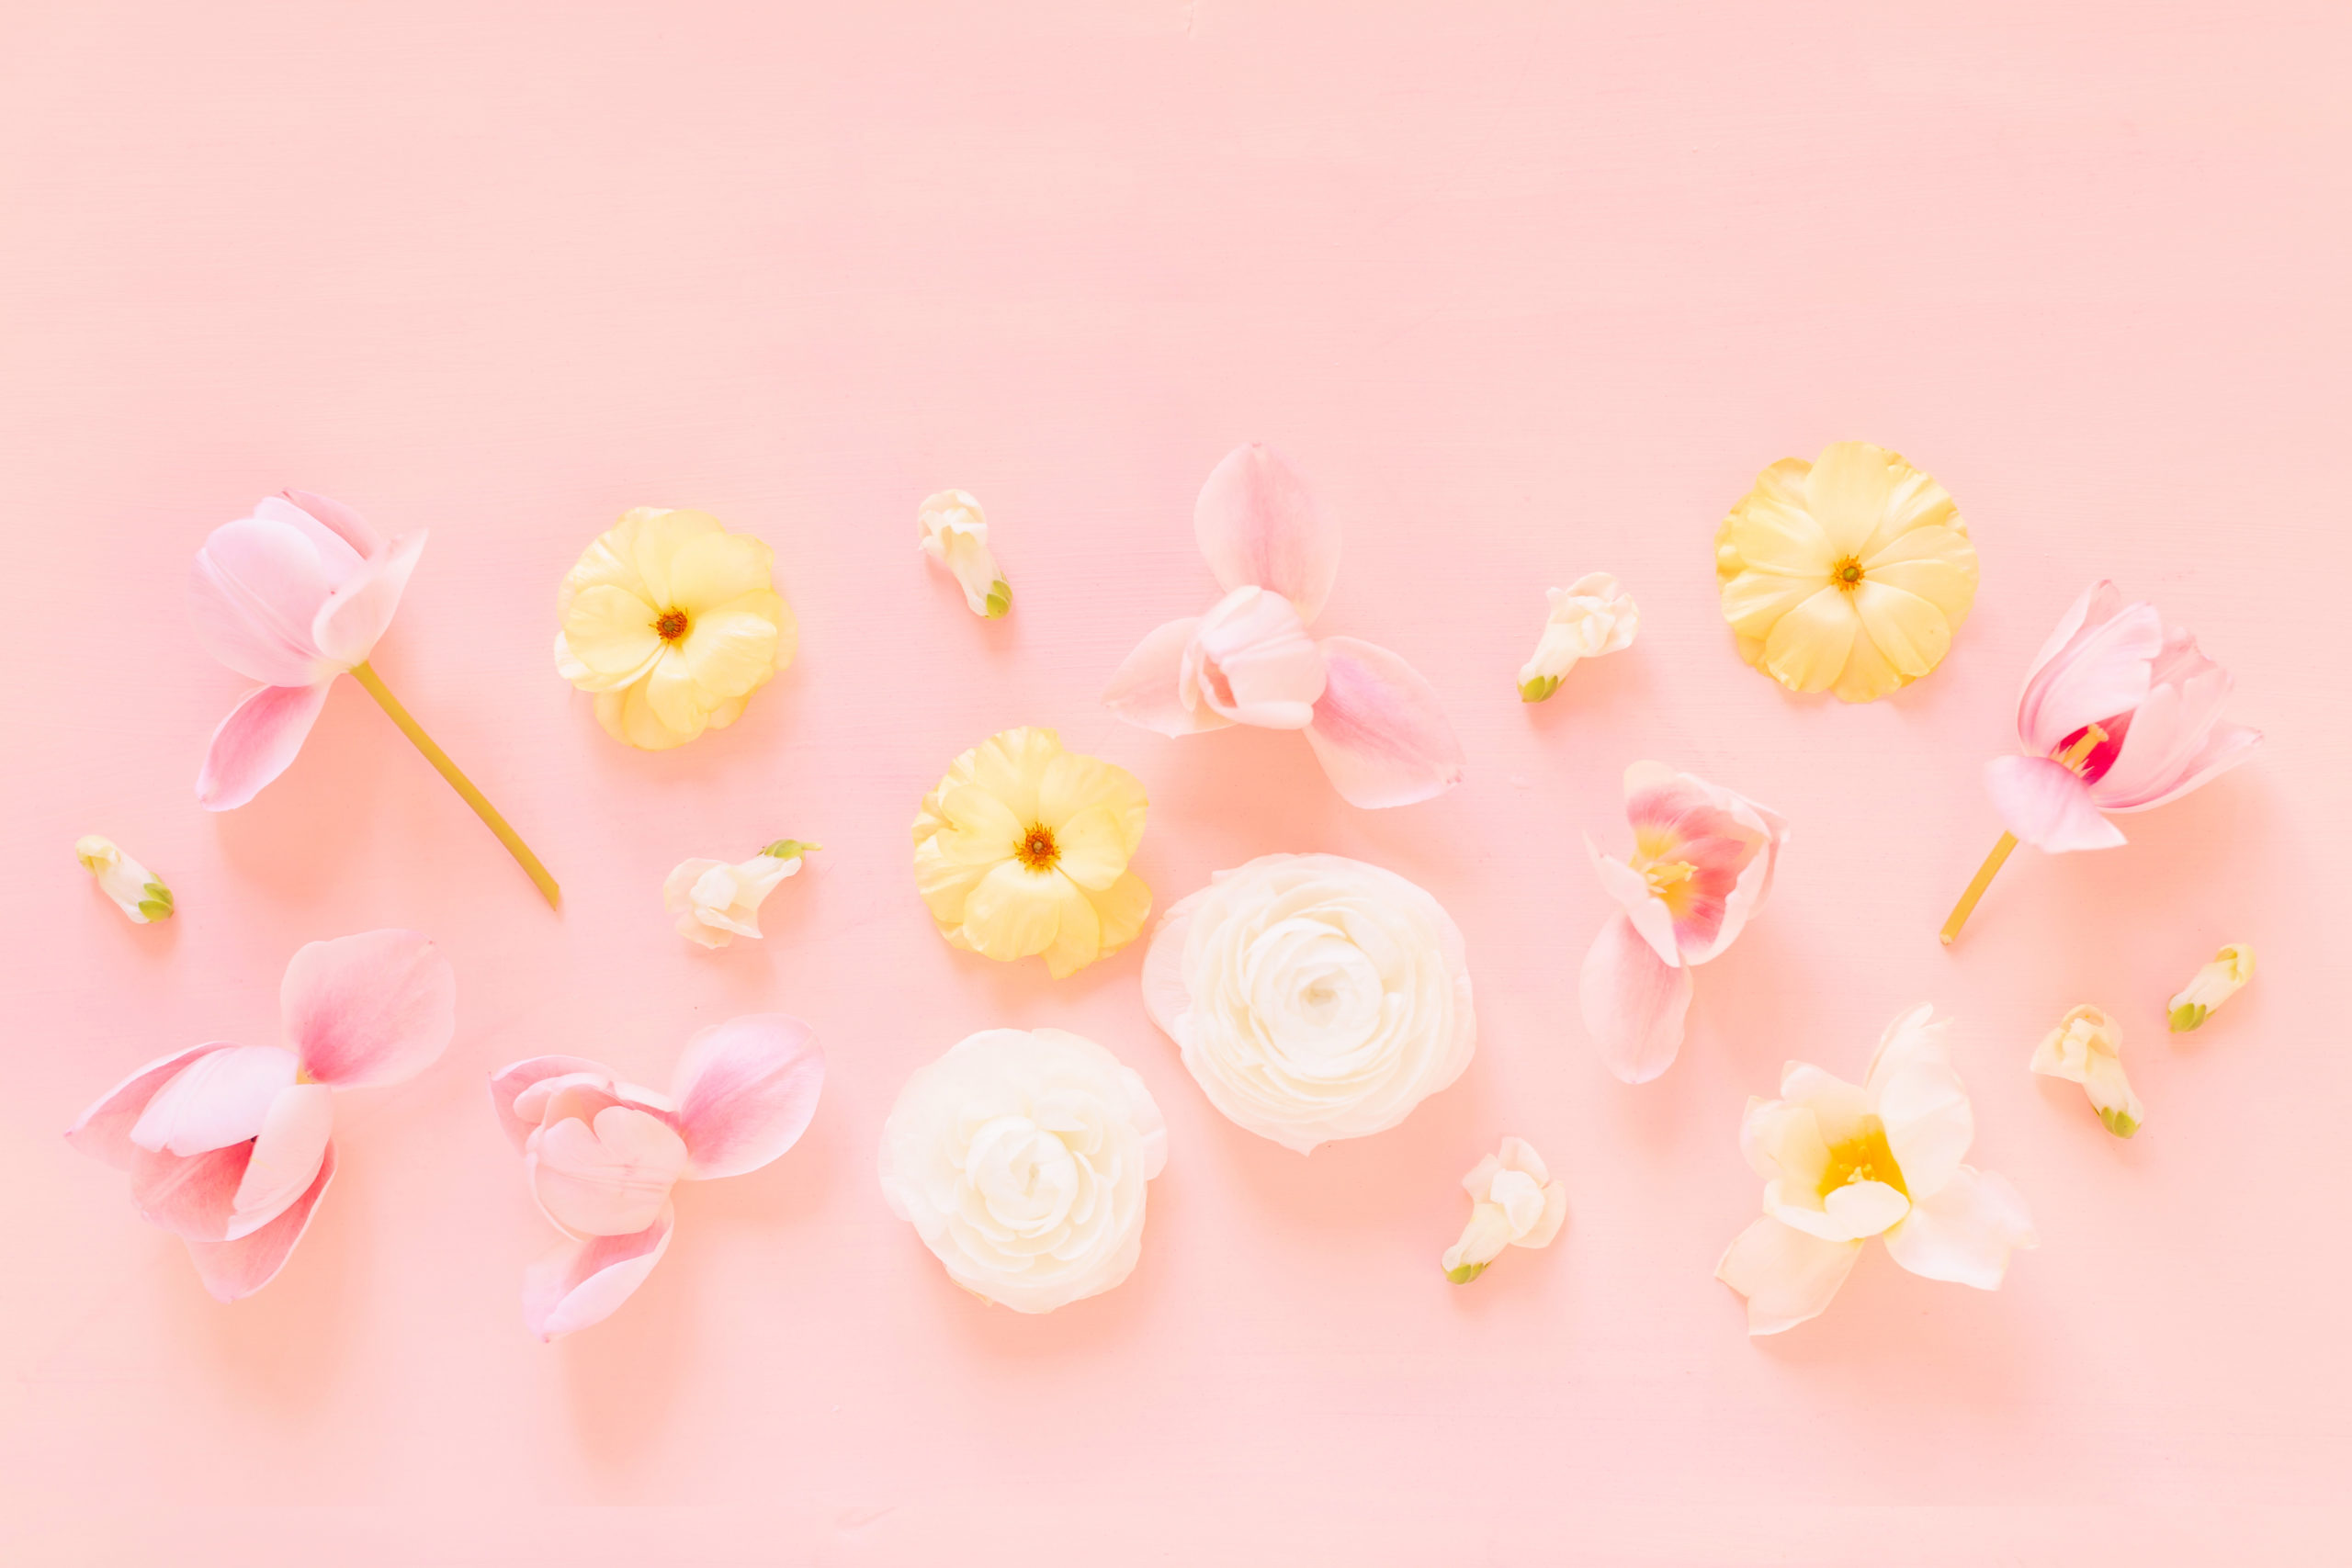 DIGITAL BLOOMS MAY 2020 | FREE DESKTOP WALLPAPER | A soft, feminine, pastel floral FREE Desktop Wallpaper for Spring 2020 | Pastel Pink and Yellow Floral Tech Wallpaper for Spring | Free April Flower Tech Wallpapers | JustineCelina Spring 2020 Digital Blooms | Free Floral Desktop Wallpaper featuring White Ranunculus and Yellow Butterfly Ranunculus, White Hyacinths and refurled Blush and White Tulips | Tulip Free Tech Wallpaper | Cheerful Spring Flower Tech Wallpaper // JustineCelina.com